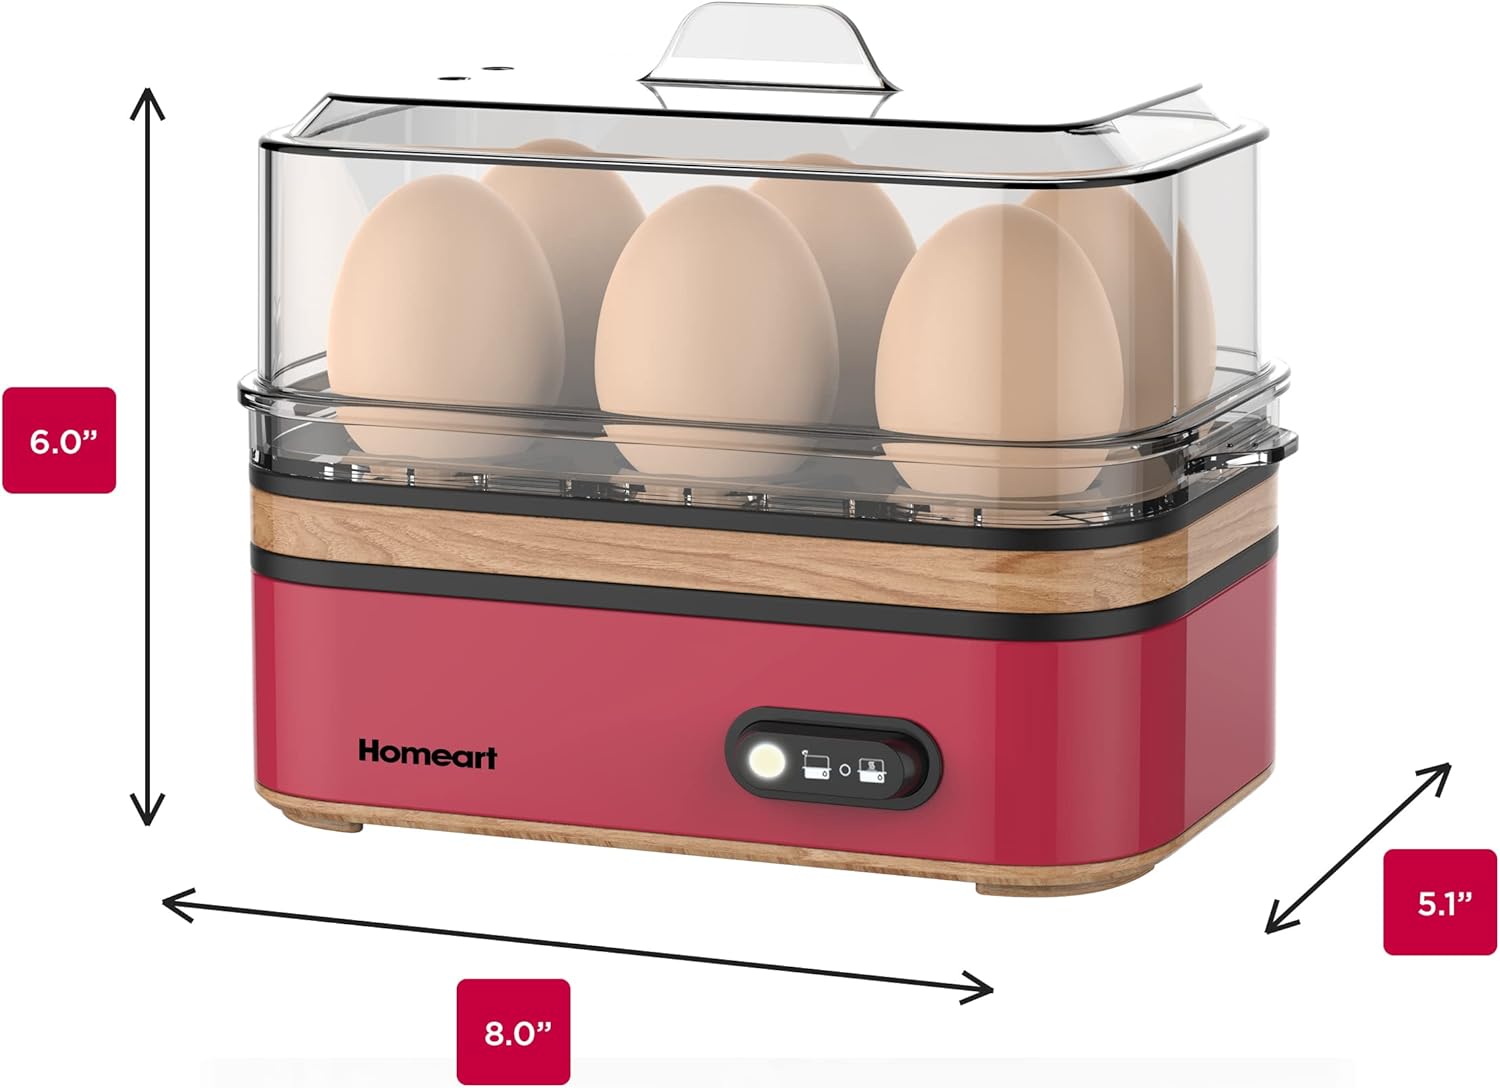 Homeart 400W Panda Egg Boiler with Wooden Detail, Red